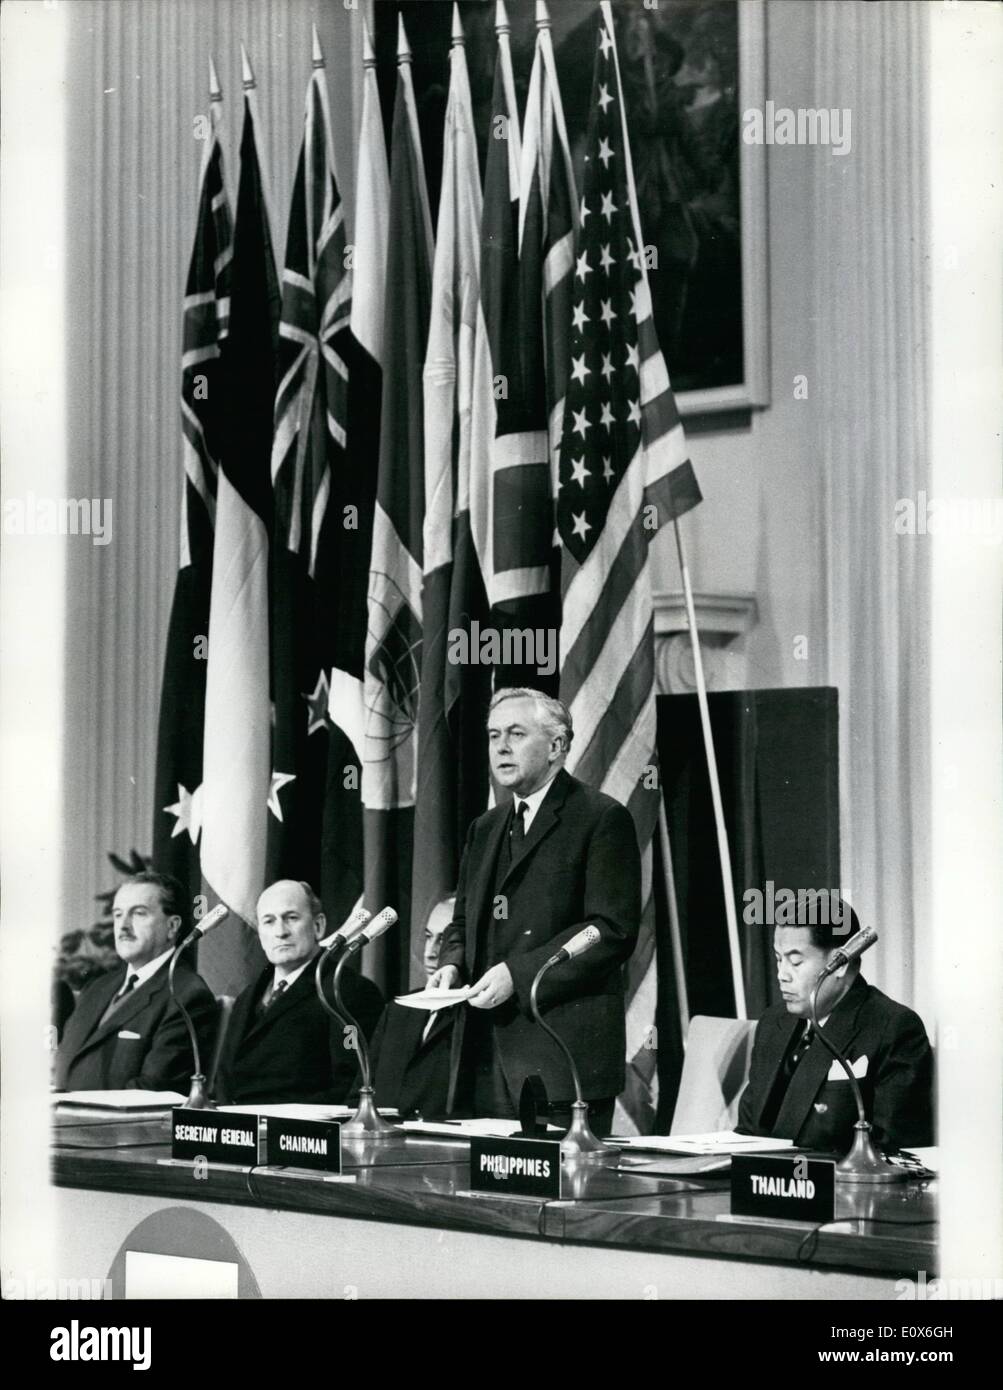 May 05, 1965 - Opening of the Seato Council of Ministers:The tenth meeting of the South East Asia Treaty Organisation Council of Ministers, opened this morning at the Banqueting Hall, Whitehall. Photo shows Mr.Harold Wilson, the Prime Minister addressing the meeting today. (L to R): Mr.Achille Clarac, of France, who is attending as an observer; Mr. D.J. Eyre, Minister of Defence, New Zealand; Mr.Zulfikar Ali Bhutto, Pakistan Foreign Minister, Mr. Wilson, and Mr.Konthi Suphamongkhon, the S.A.E. TO Secretary -General. Stock Photo